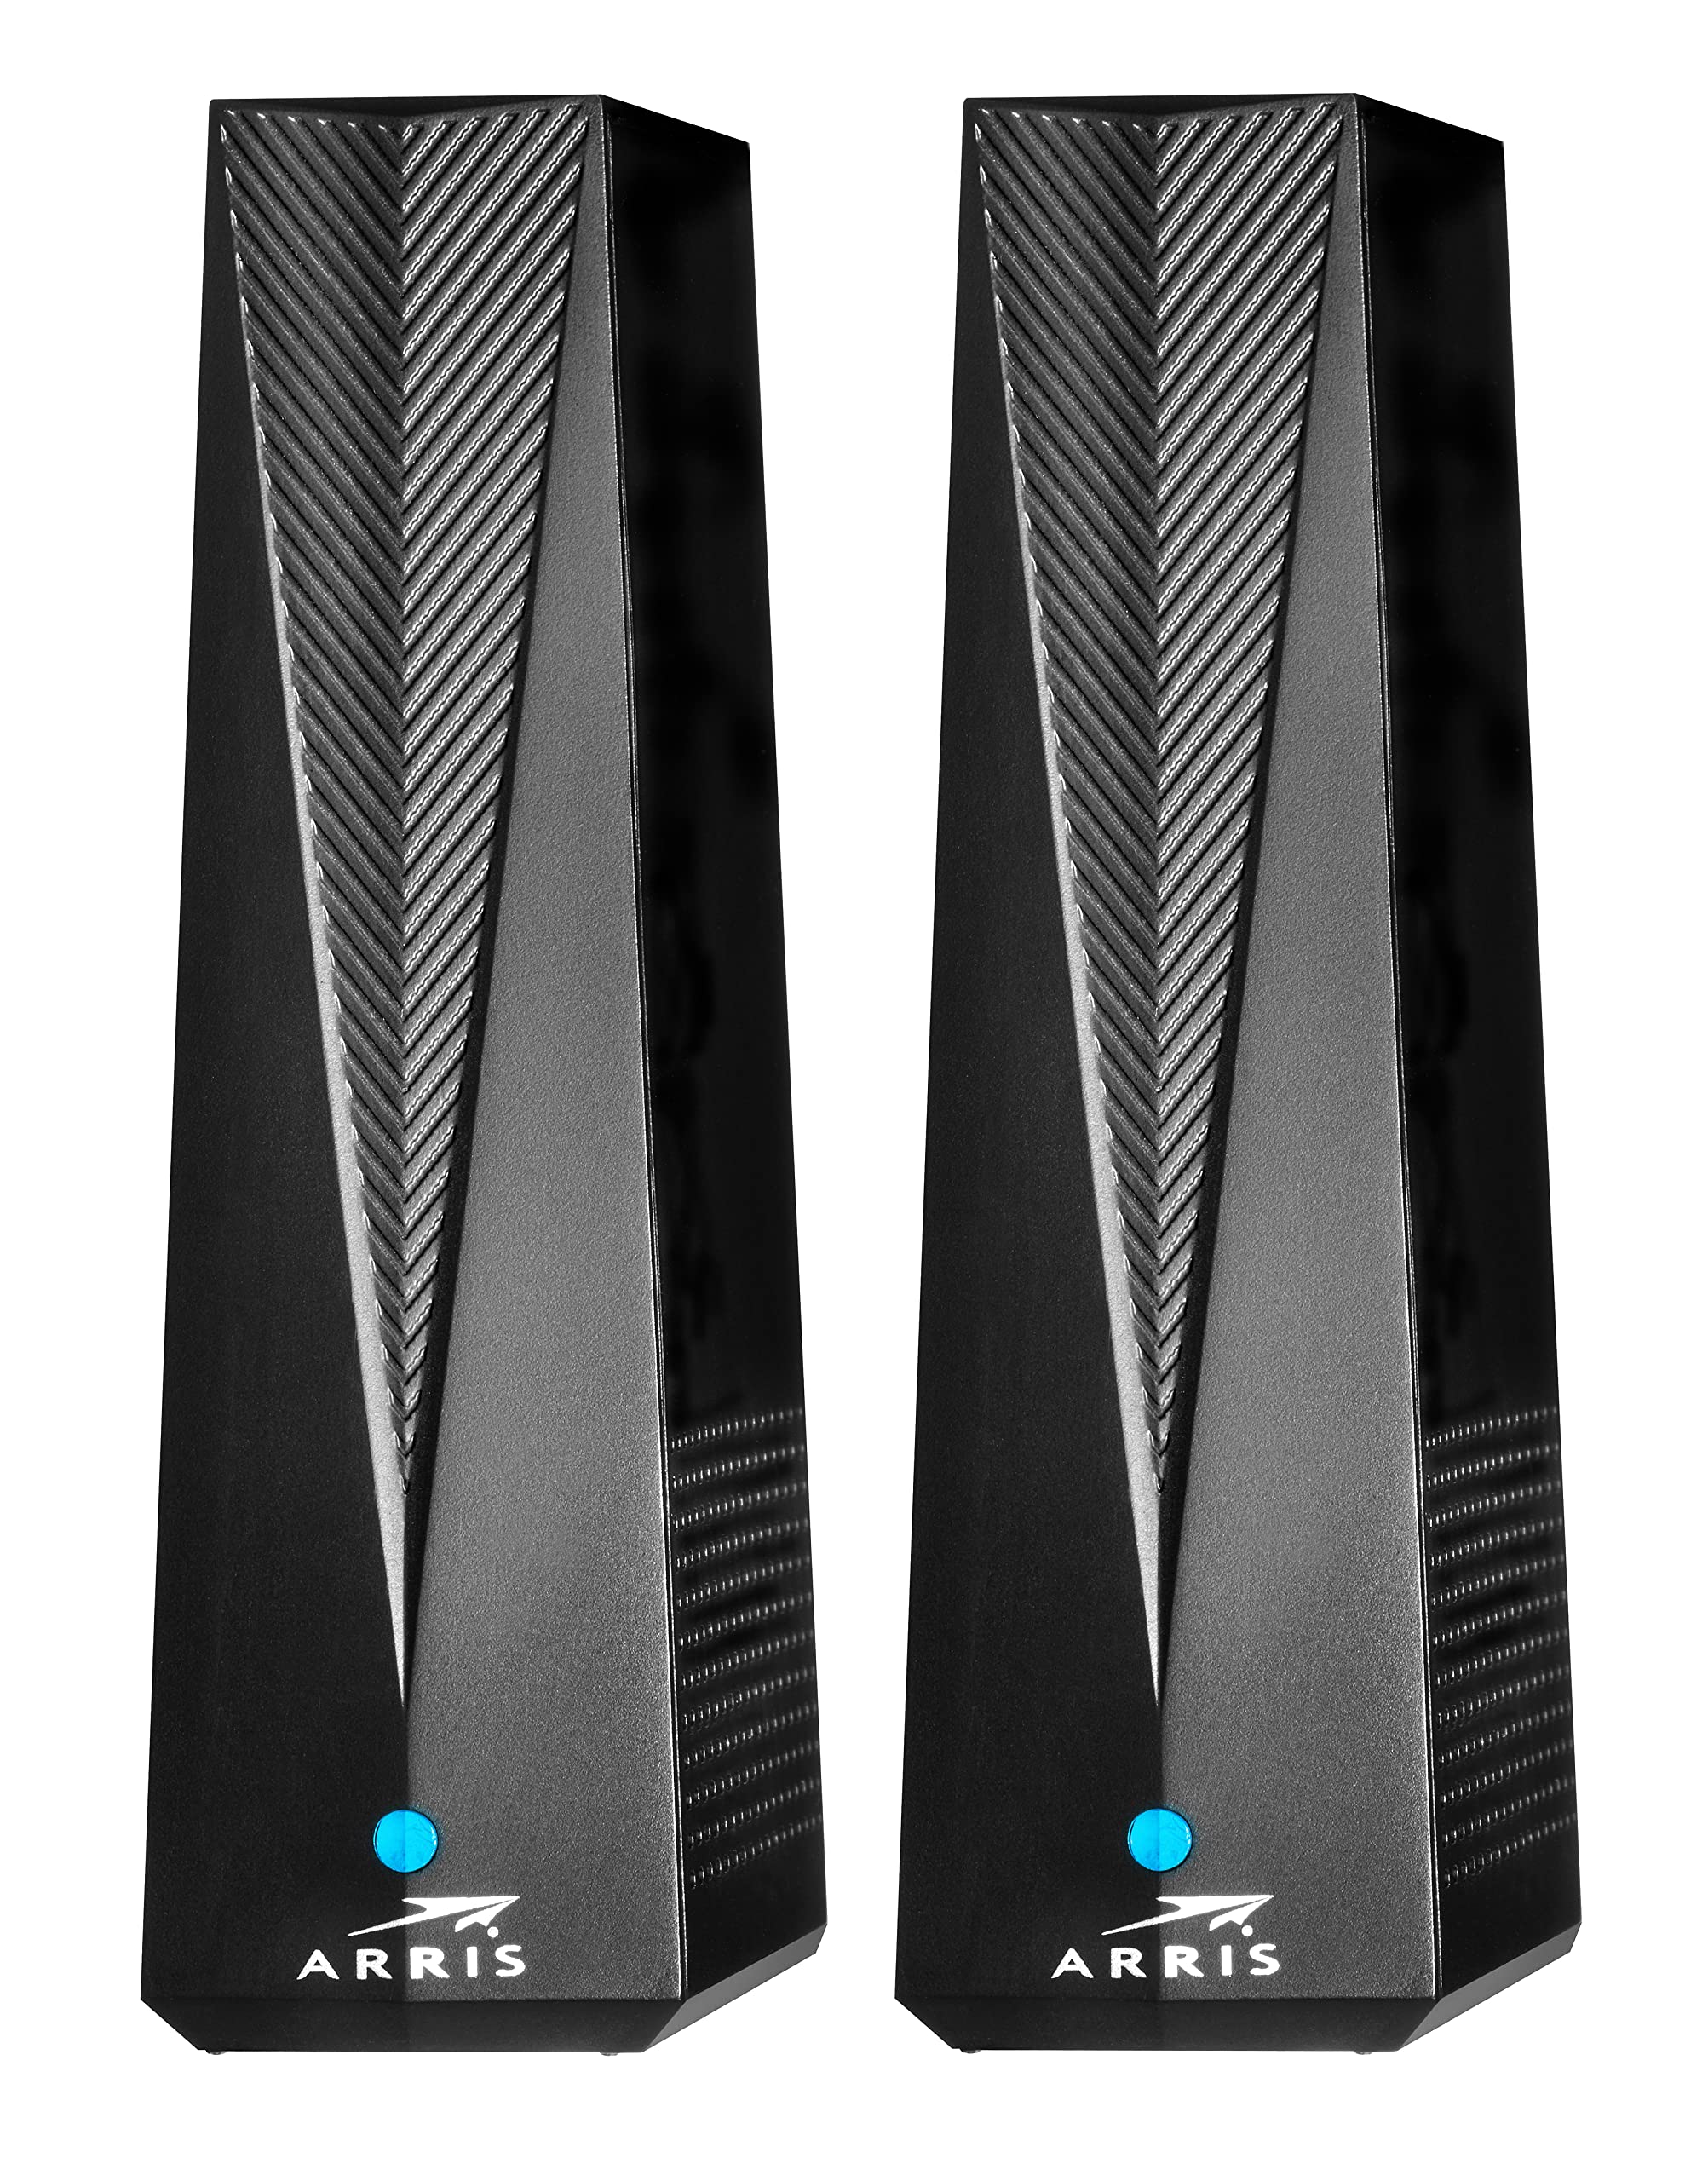 Amazon: Surfboard Thruster Wi-Fi 6E Gaming Router Acceleration Kit $179.30 + Free Shipping